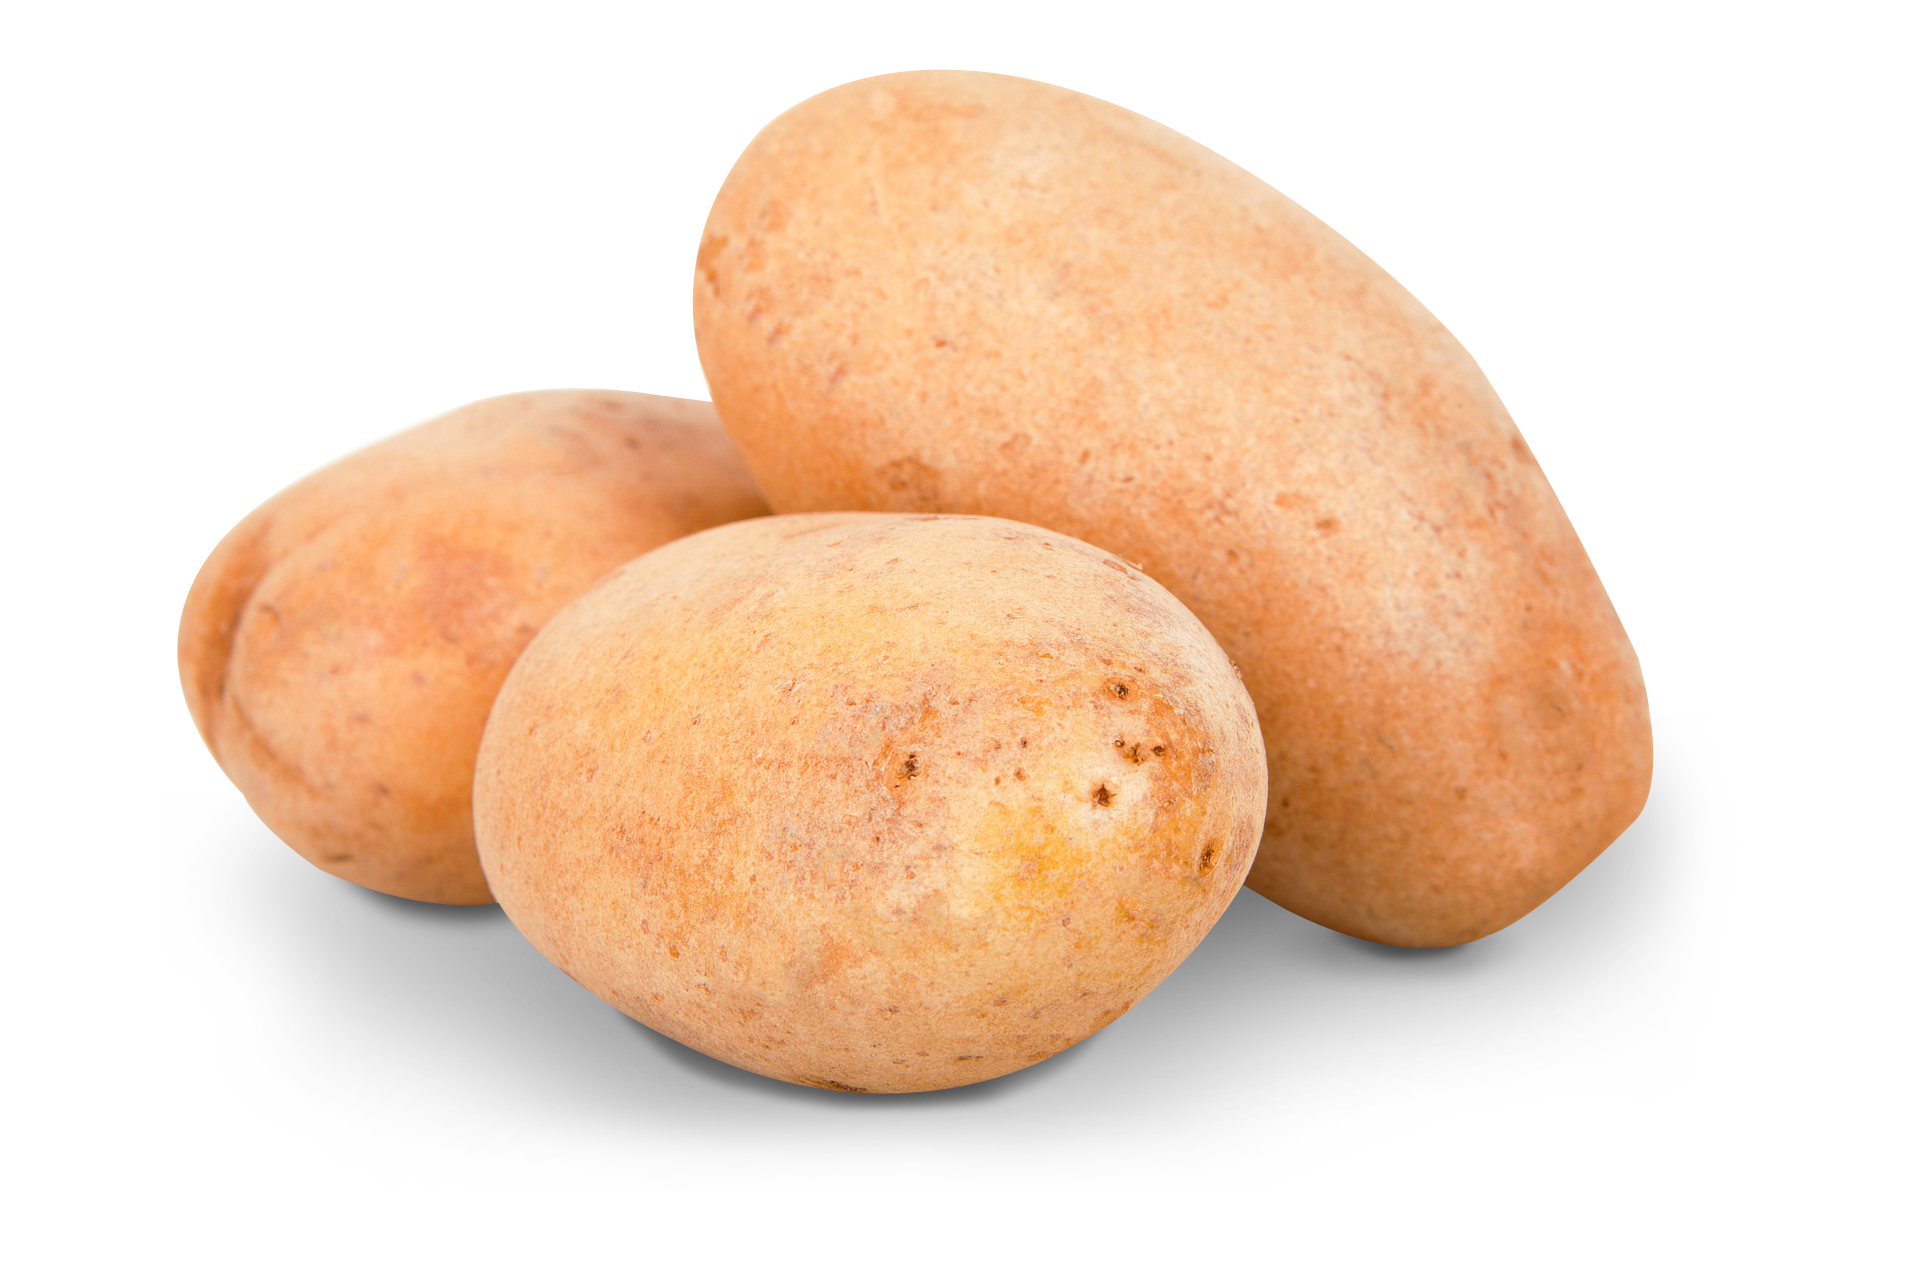 Potato clipart high resolution. Png image purepng free